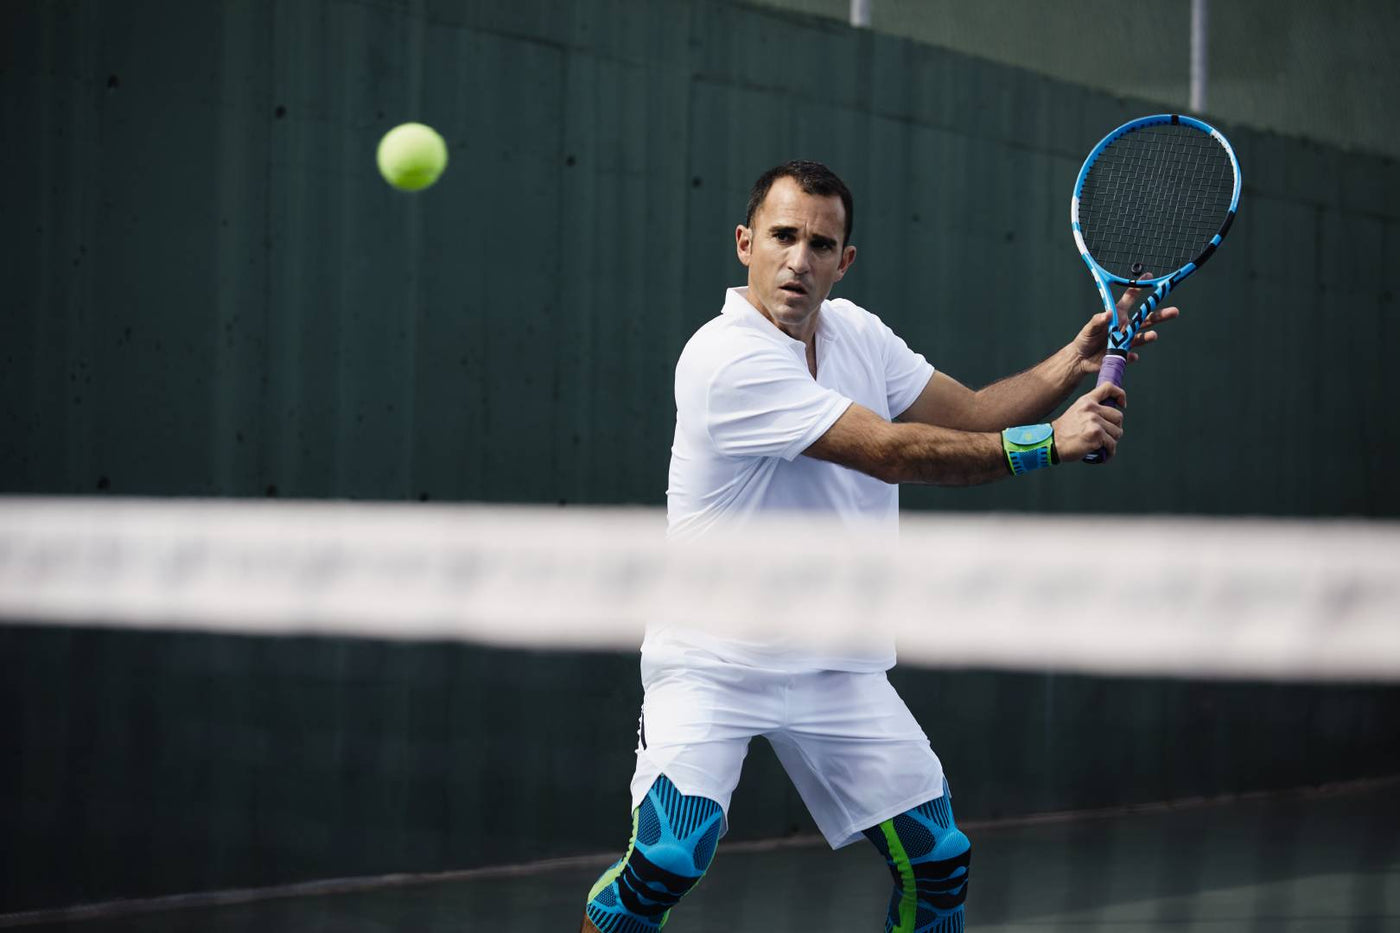 Man playing tennis. The tennis net is blurry in the foreground, the man is in focus in the background. He is wearing Bauerfeind Sports Knee Supports and Sports Wrist Strap to avoid tennis injures there.